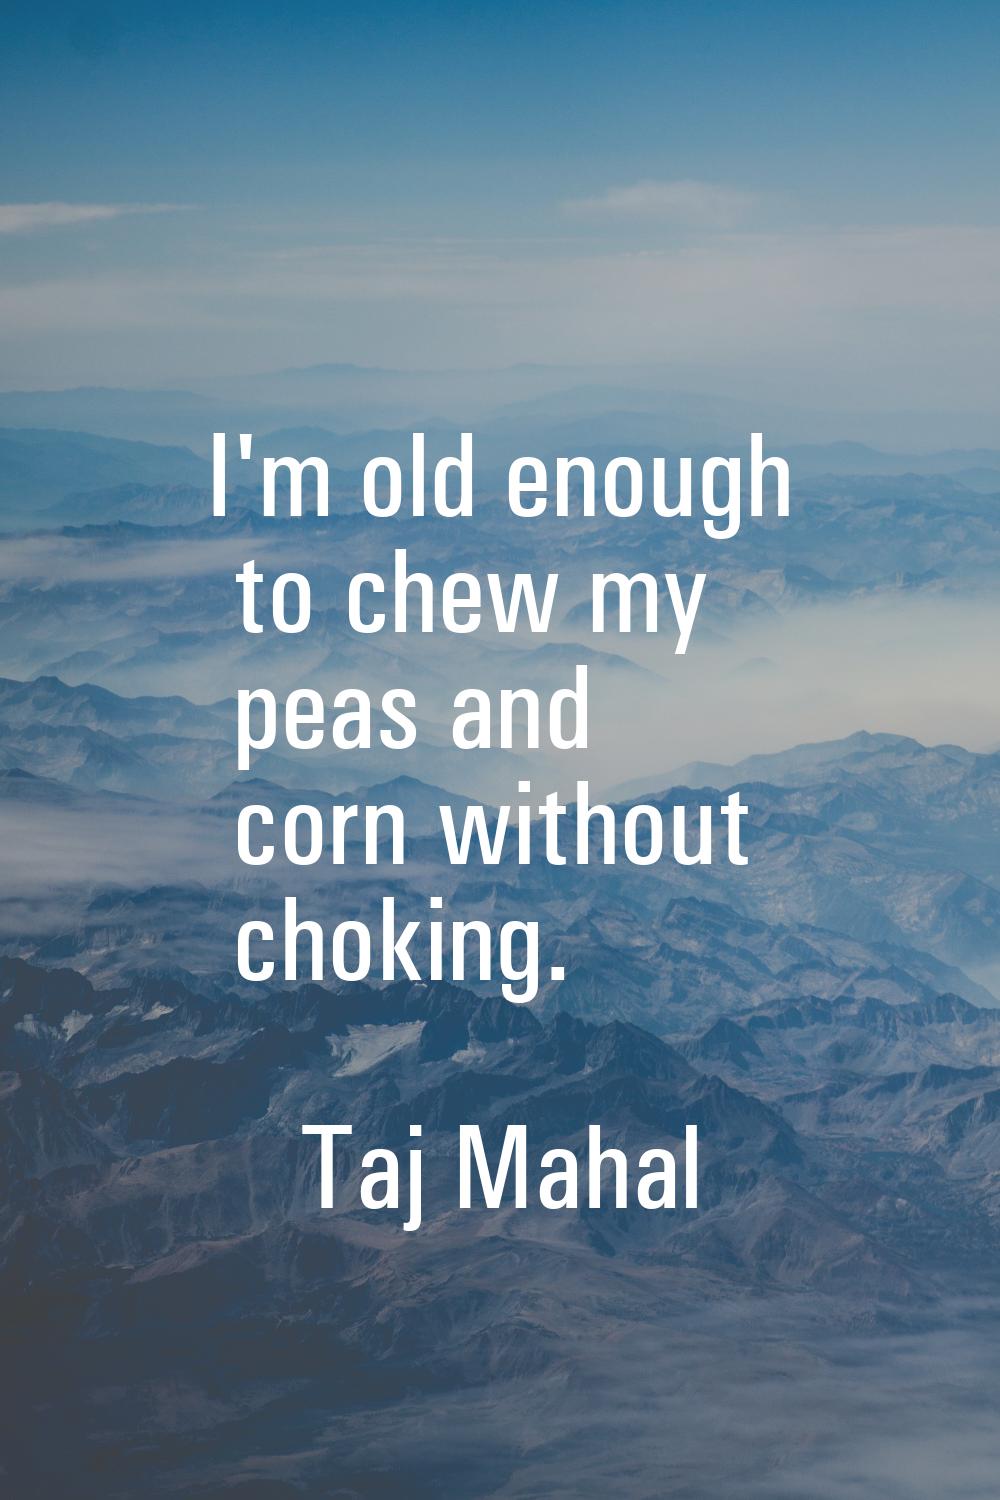 I'm old enough to chew my peas and corn without choking.